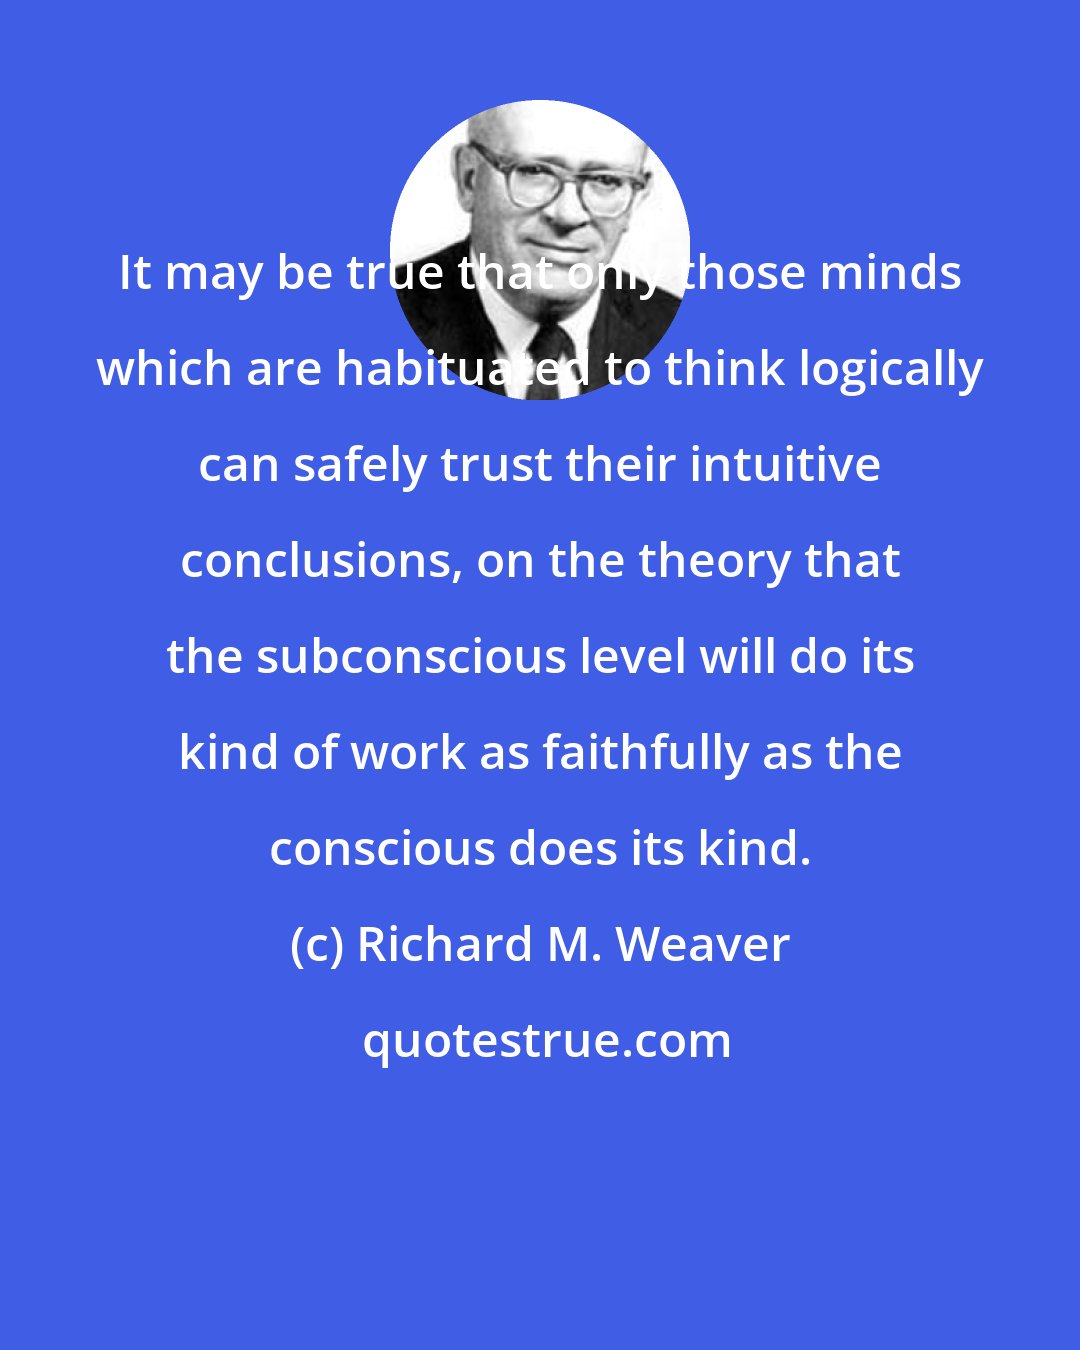 Richard M. Weaver: It may be true that only those minds which are habituated to think logically can safely trust their intuitive conclusions, on the theory that the subconscious level will do its kind of work as faithfully as the conscious does its kind.